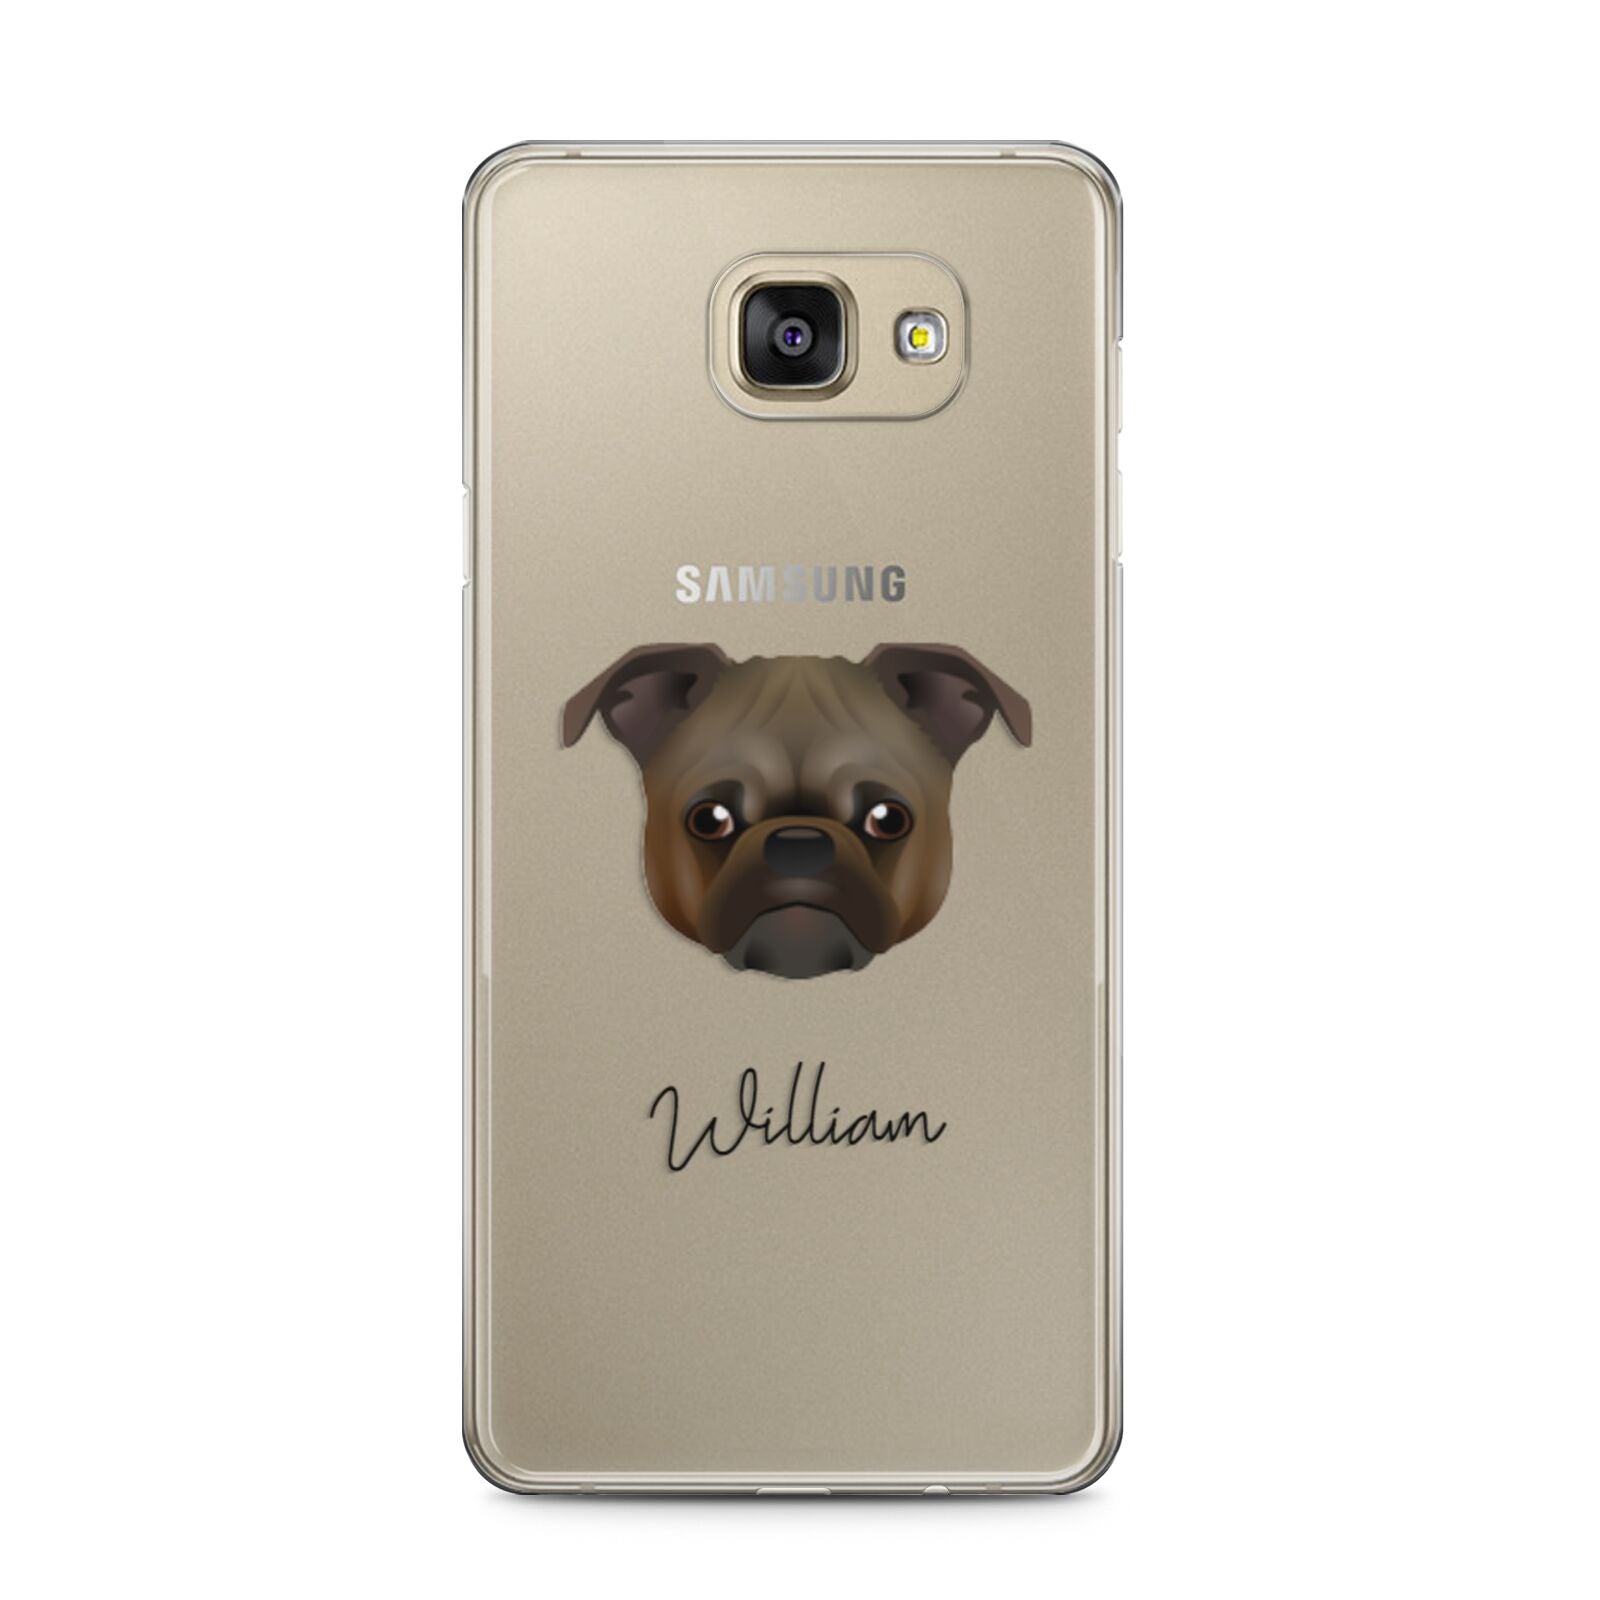 Chug Personalised Samsung Galaxy A5 2016 Case on gold phone